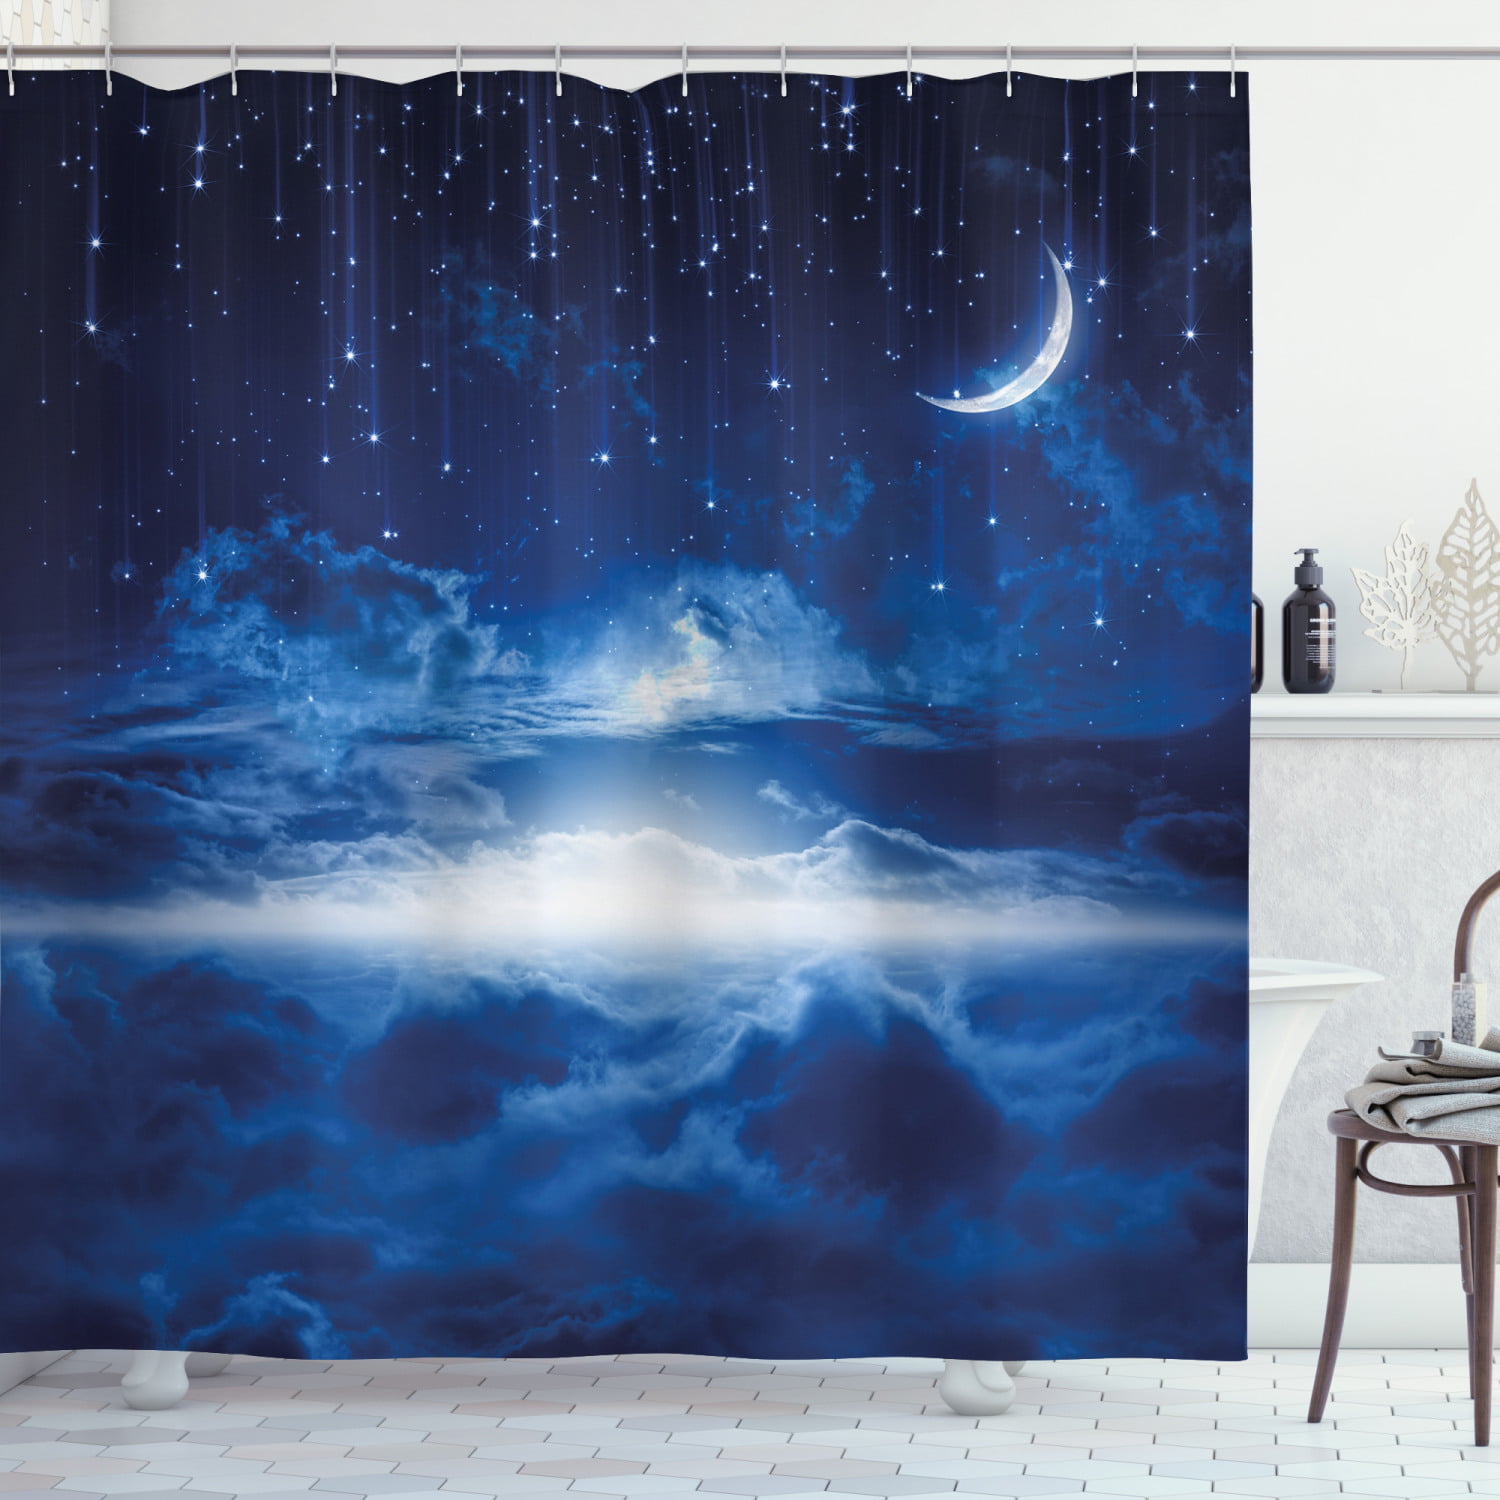 Details about   71" Fantasy Night Sky Shower Curtain & Hooks Moon Tree Bathroom Accessory Sets 